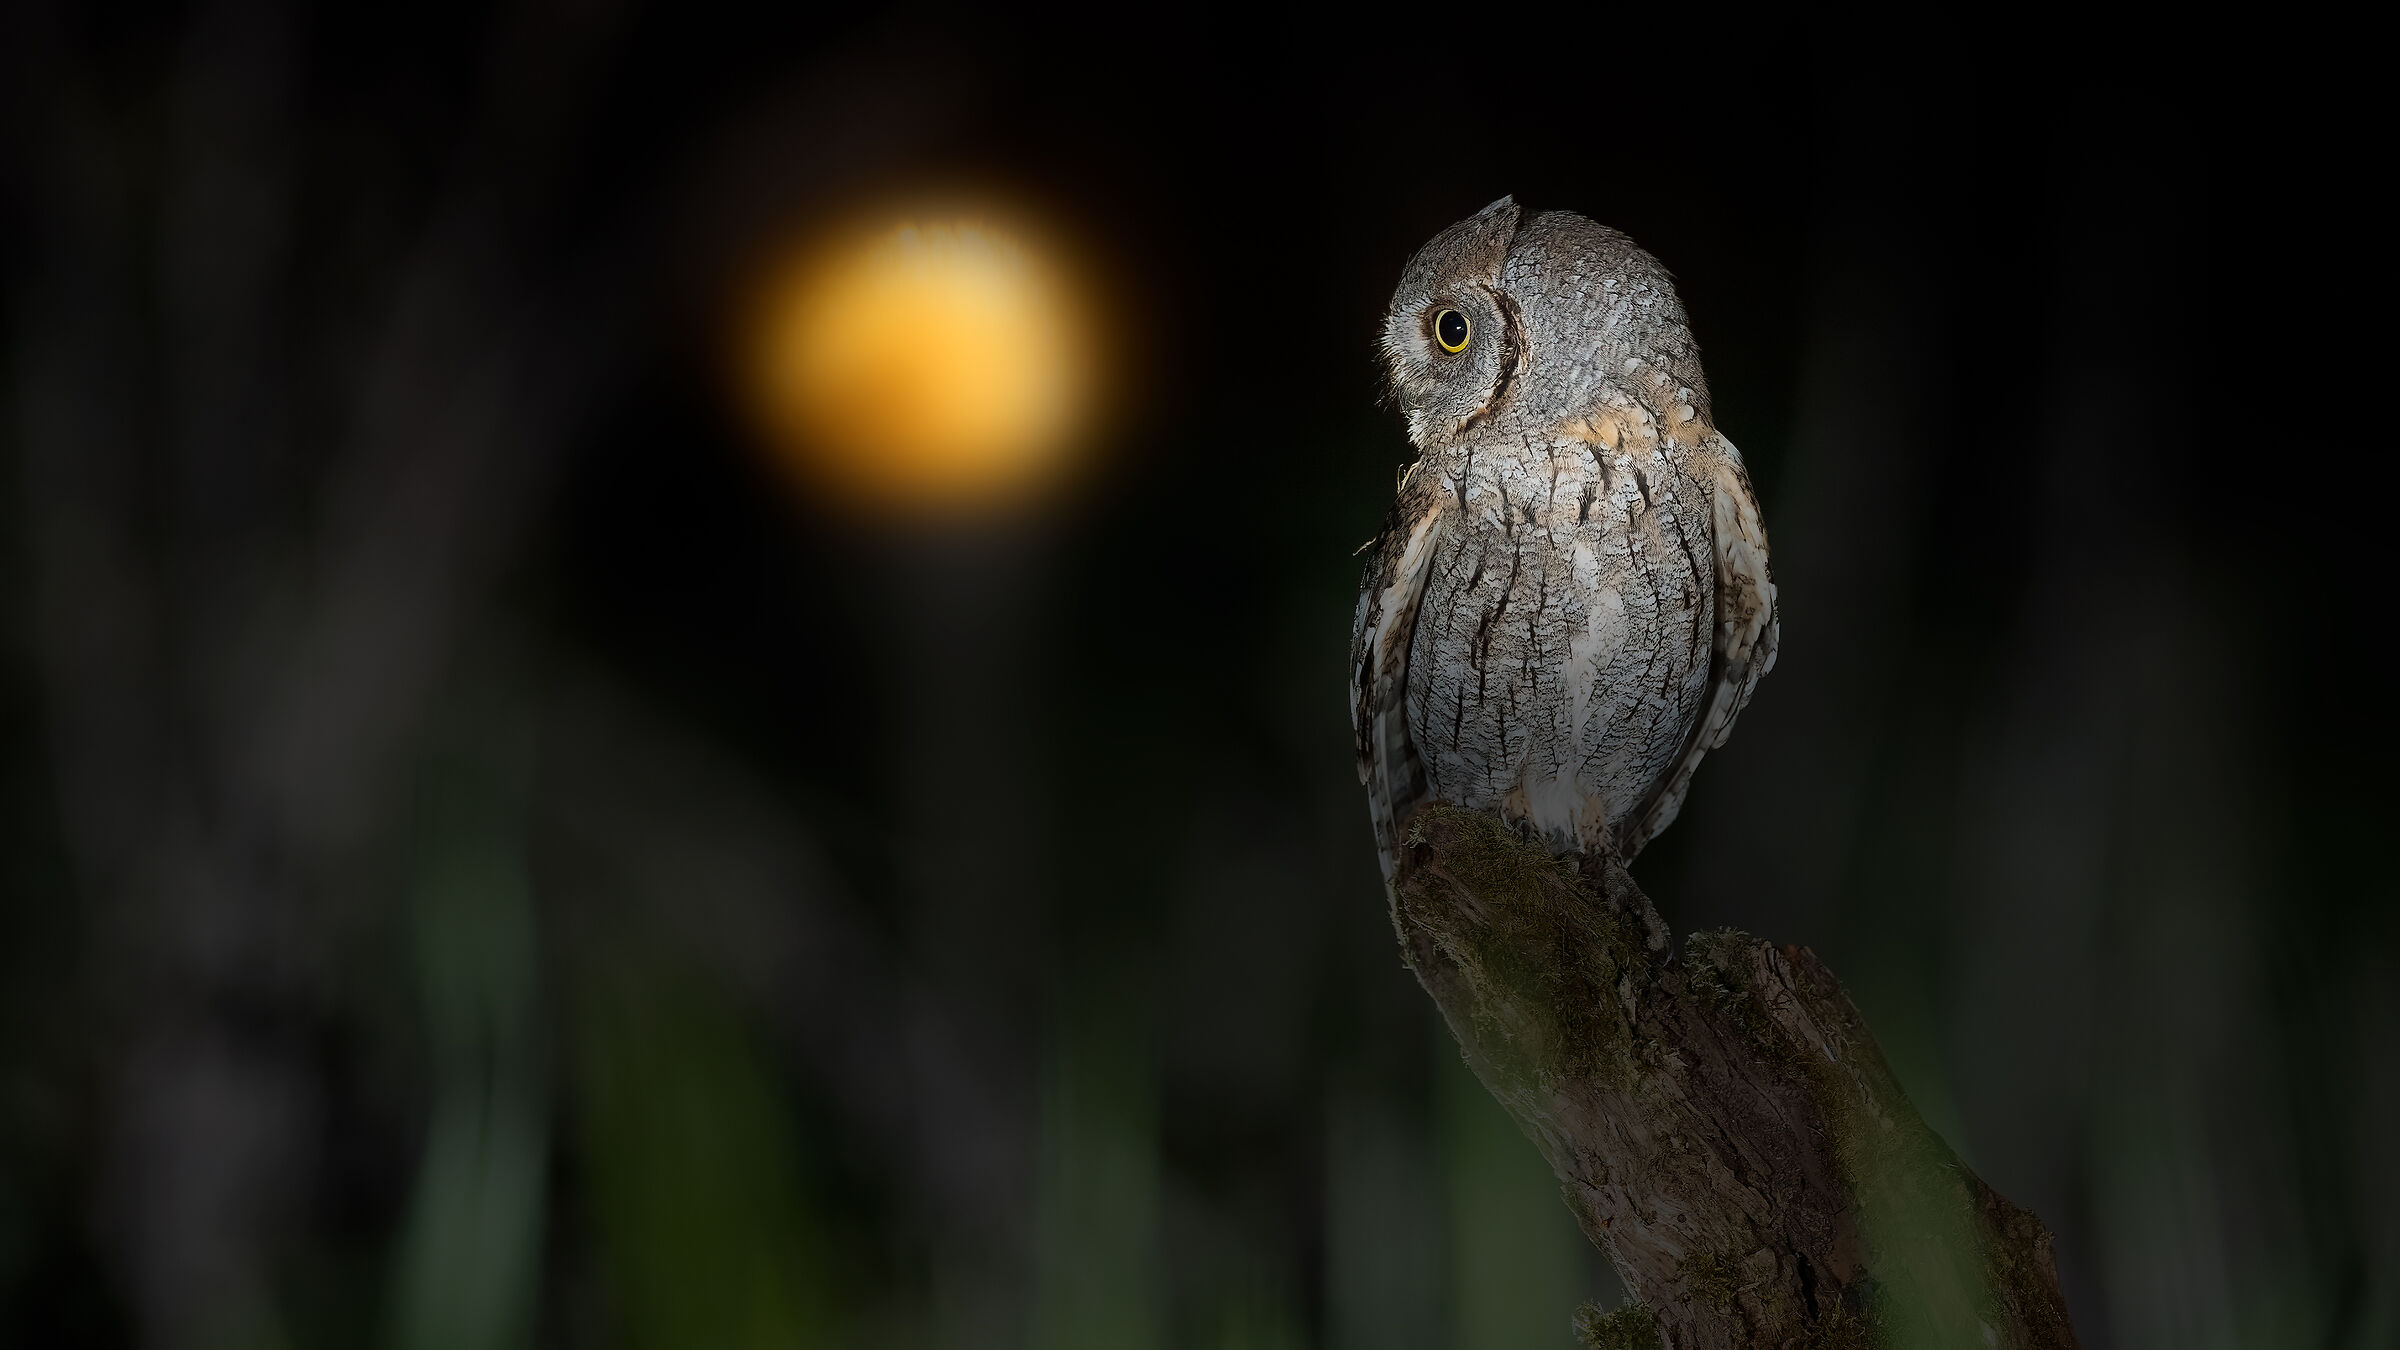 Darkness and light - Scops owl...